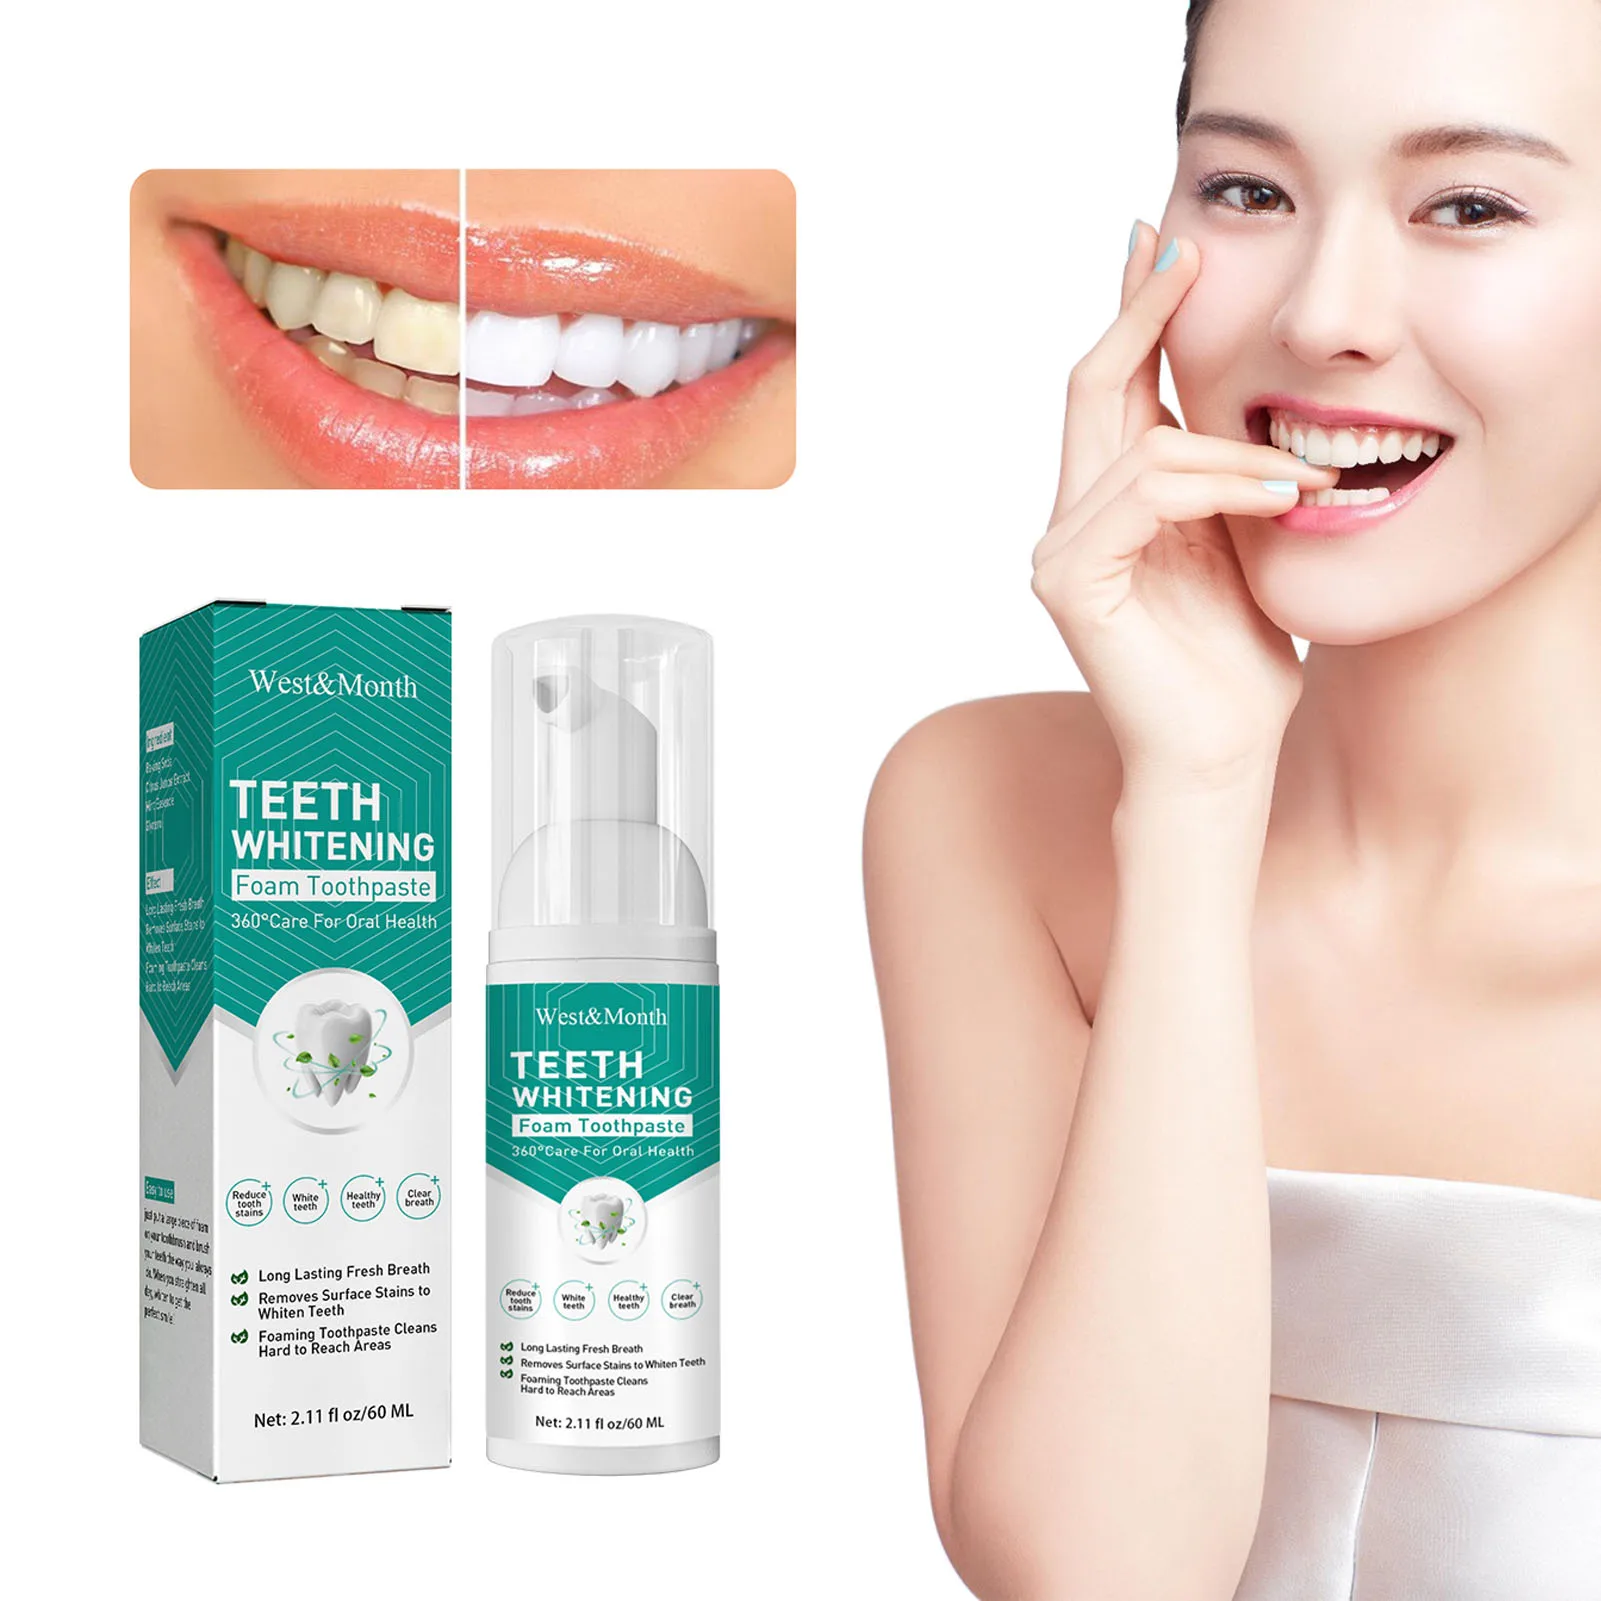 

2.11 Fl Oz Foam Toothpaste For Whitening Teeth 360-Degree Care For Oral Health Natural Whitening Toothpaste For Teeth Cleaning